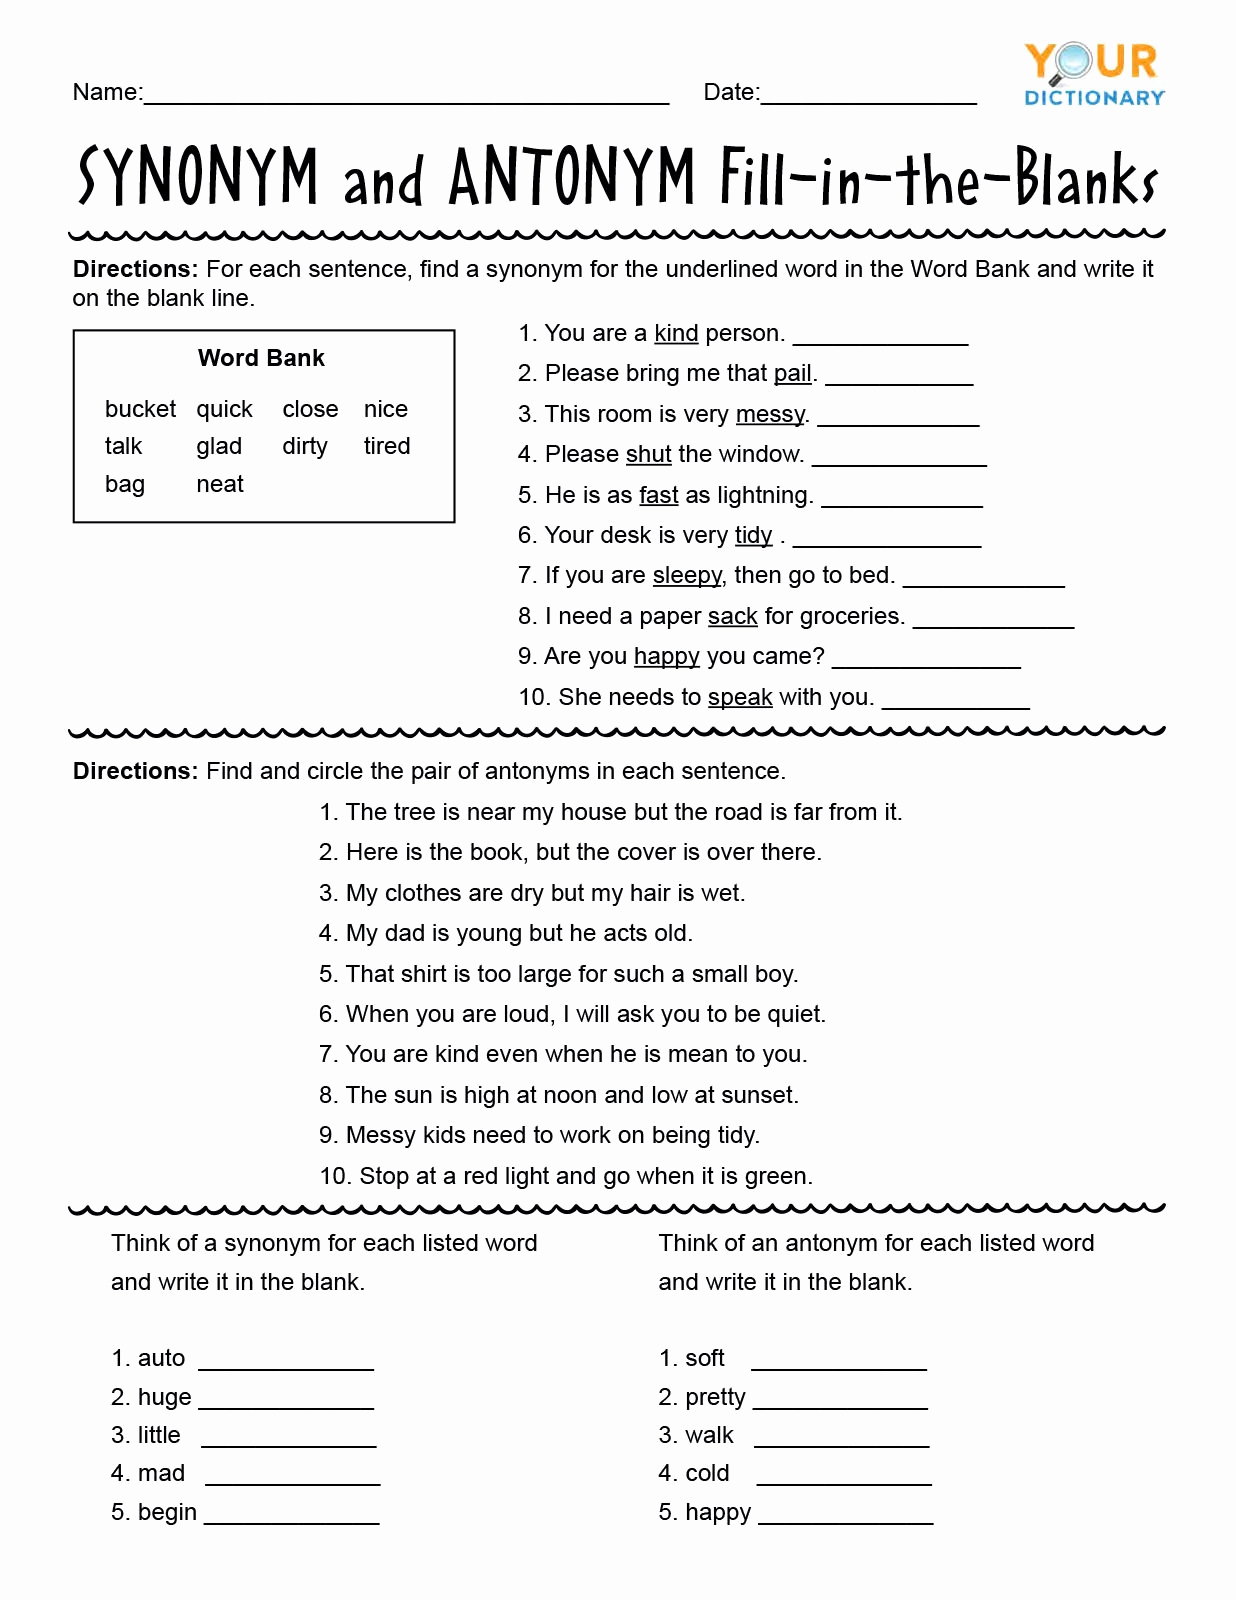 Computer Worksheets for Middle School Fresh 20 Puter Worksheets for Middle School